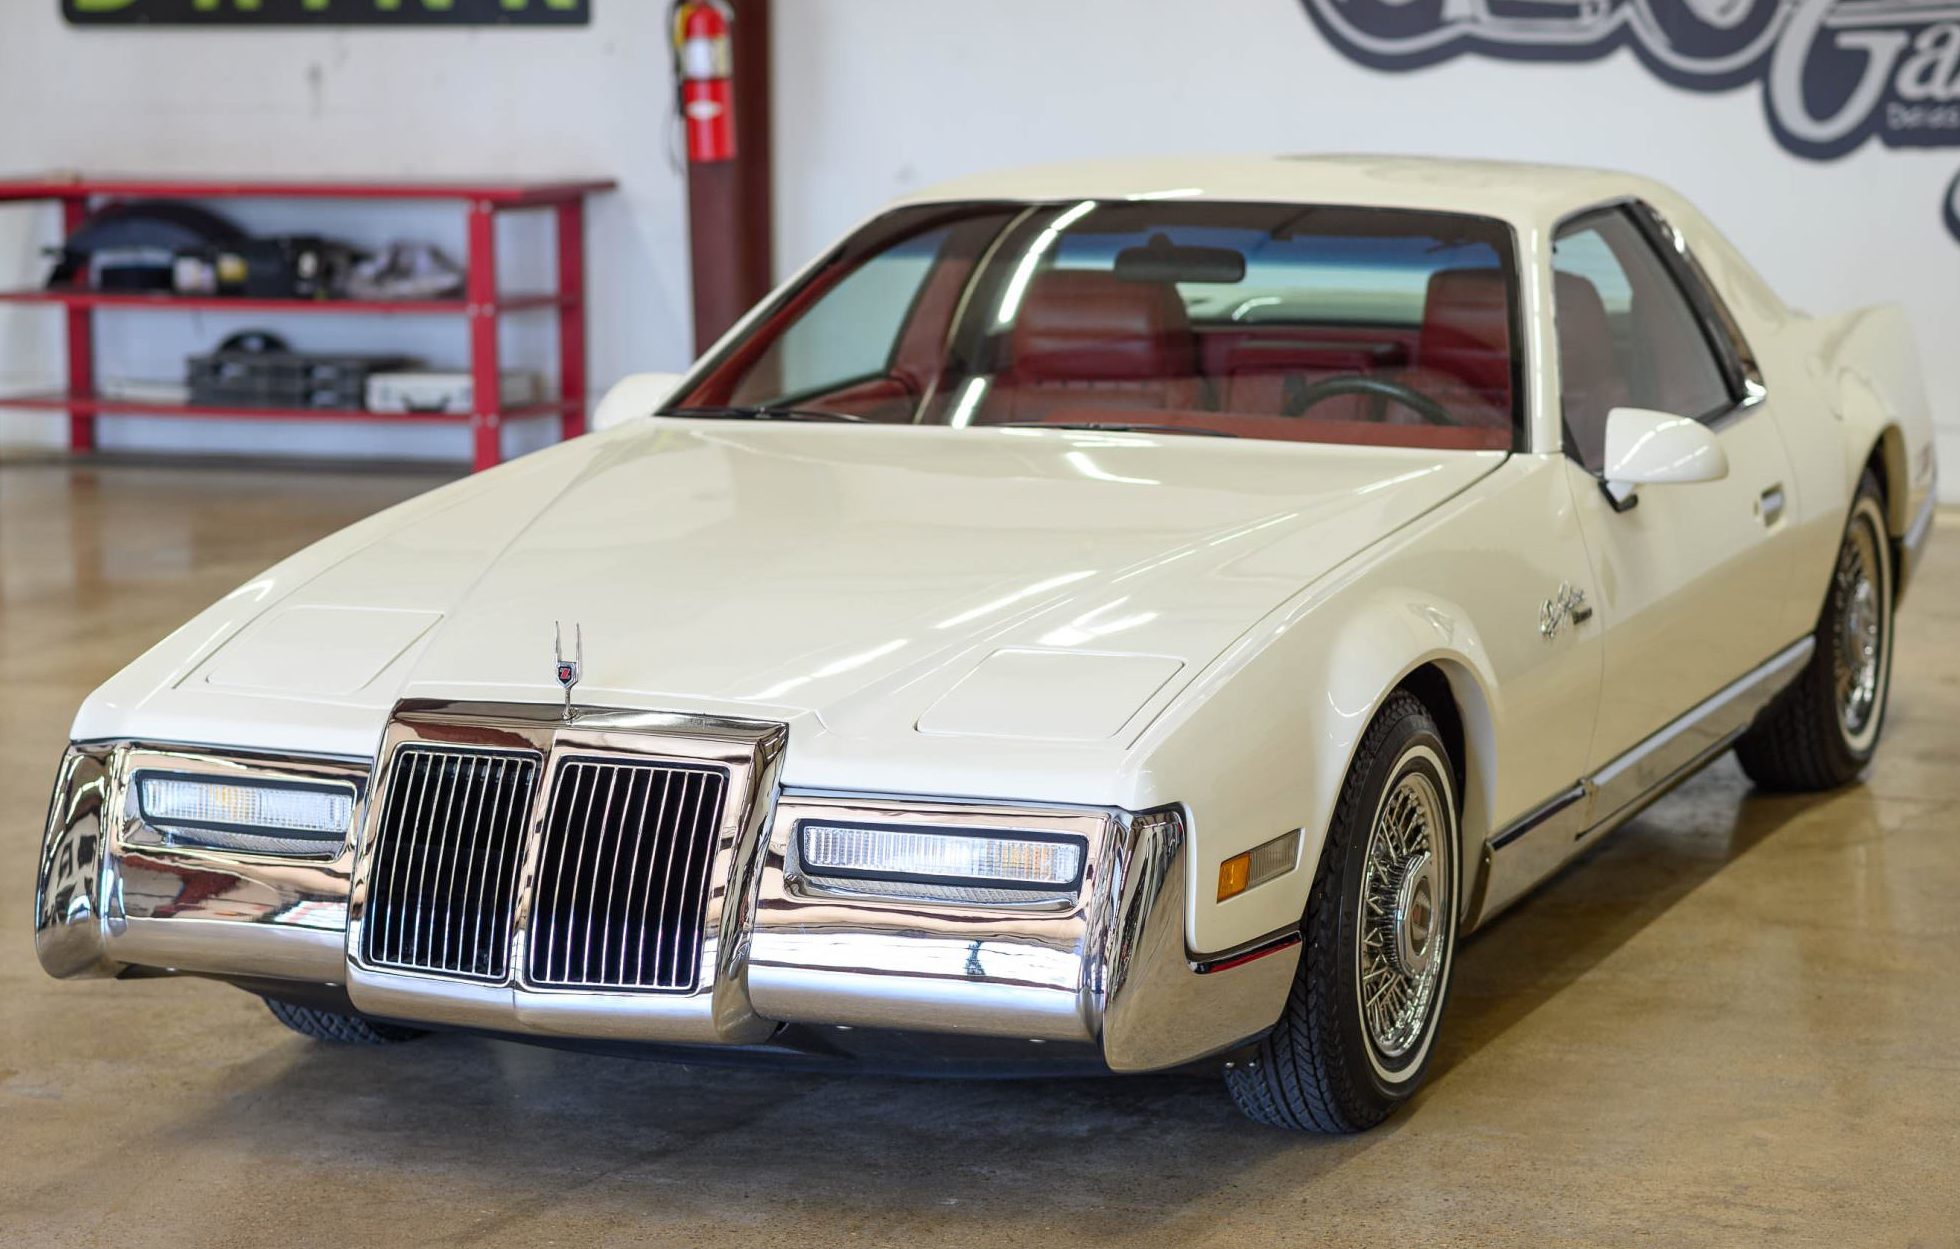 Gas Monkey Garage Are Selling Their Rare 1986 Zimmer Quicksilver